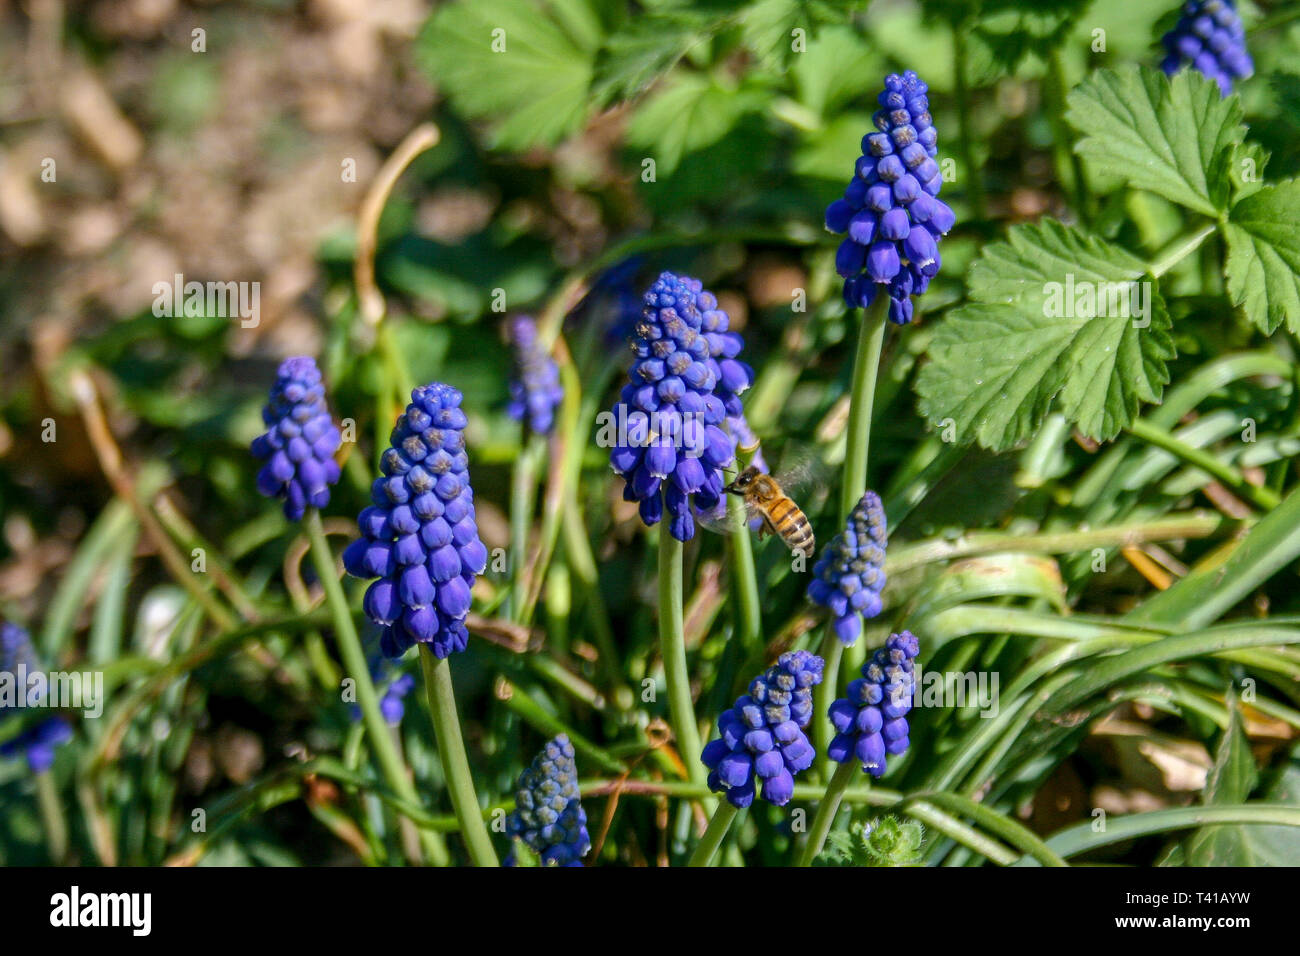 Muscari botryoides commonly known as grape hyacinth, purple flower with bee and green grass Stock Photo